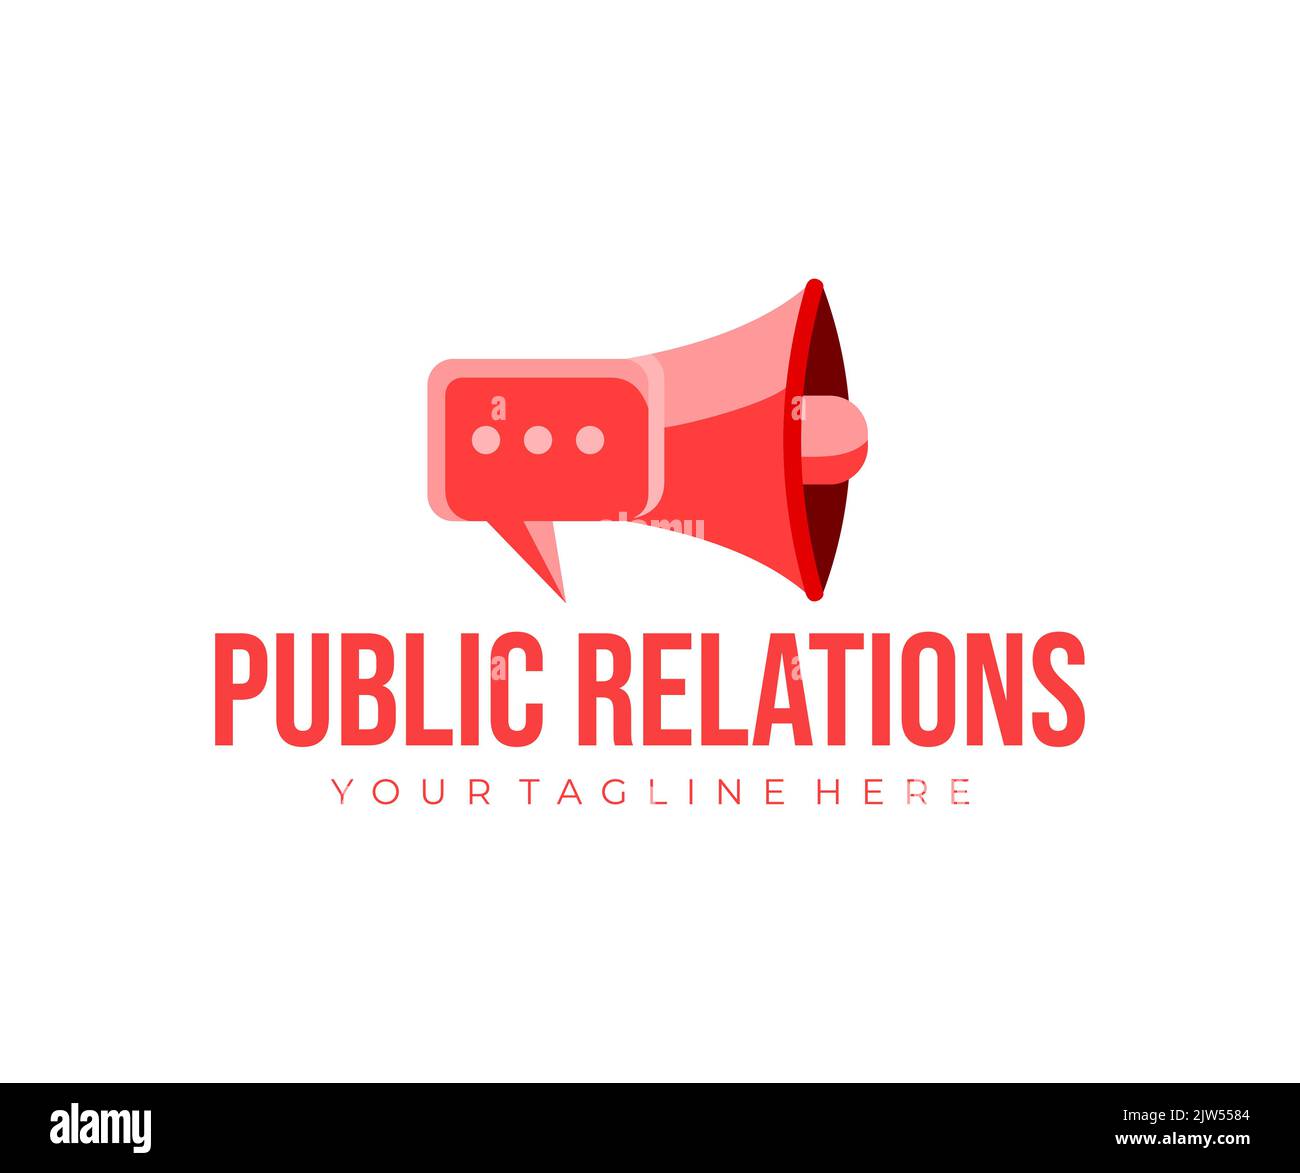 Public relations, megaphone, bullhorn and speaking trumpet, logo design. Public opinion management, social interactions, target audience Stock Vector